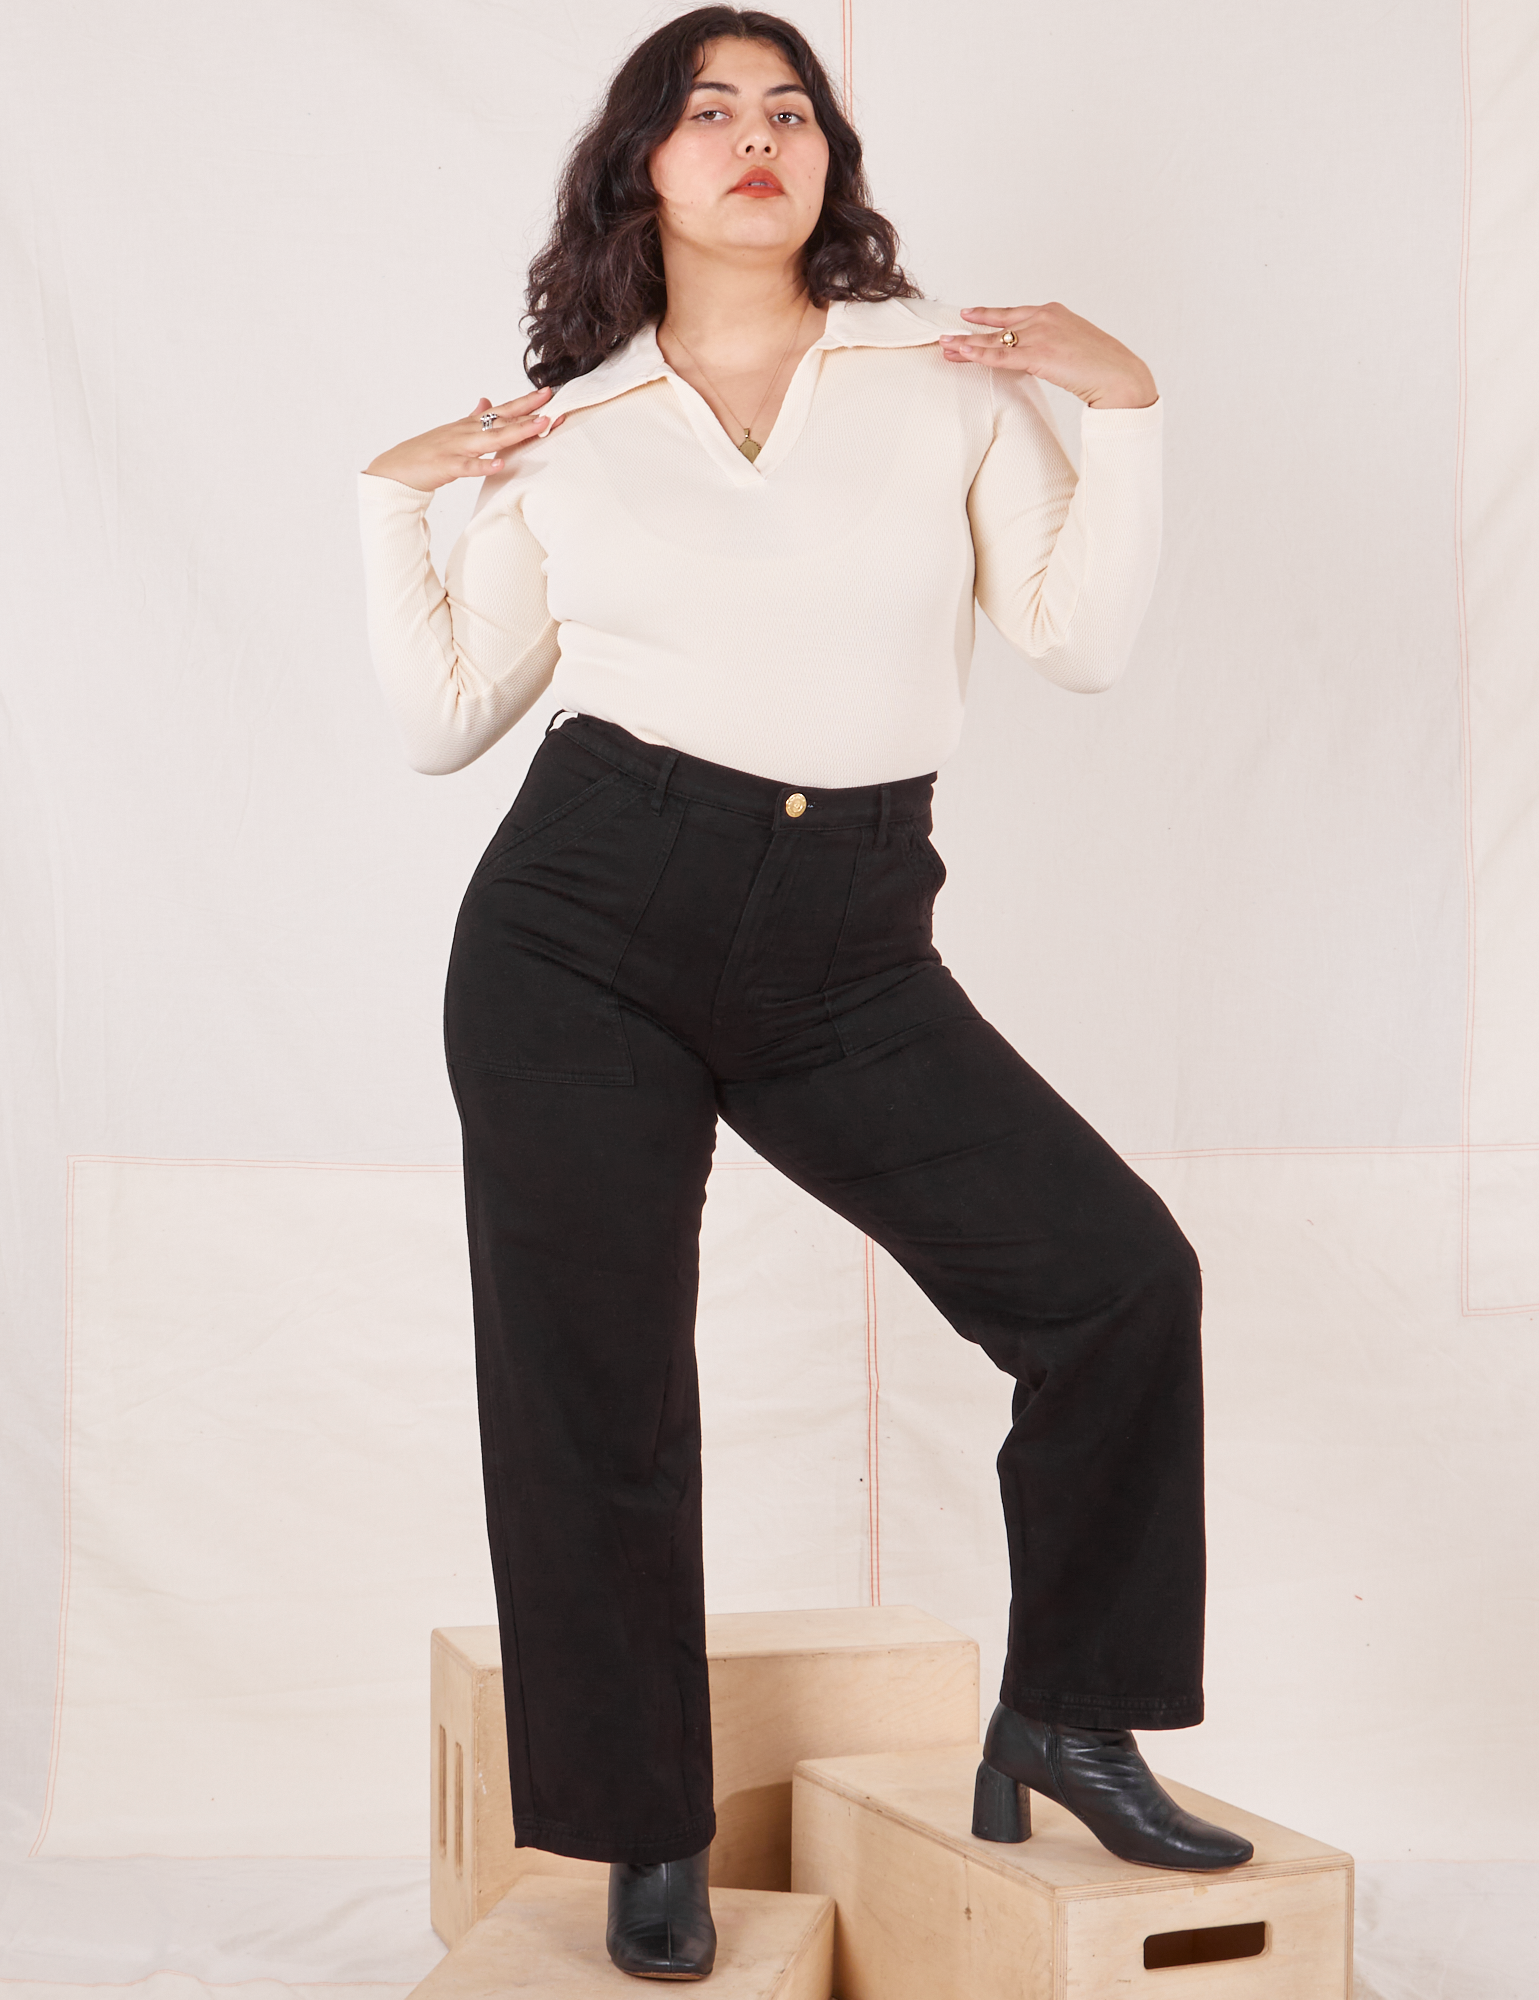 Melanie is 5&#39;6&quot; and wearing M Organic Work Pants in Basic Black paired with vintage off-white Long Sleeve Fisherman Polo